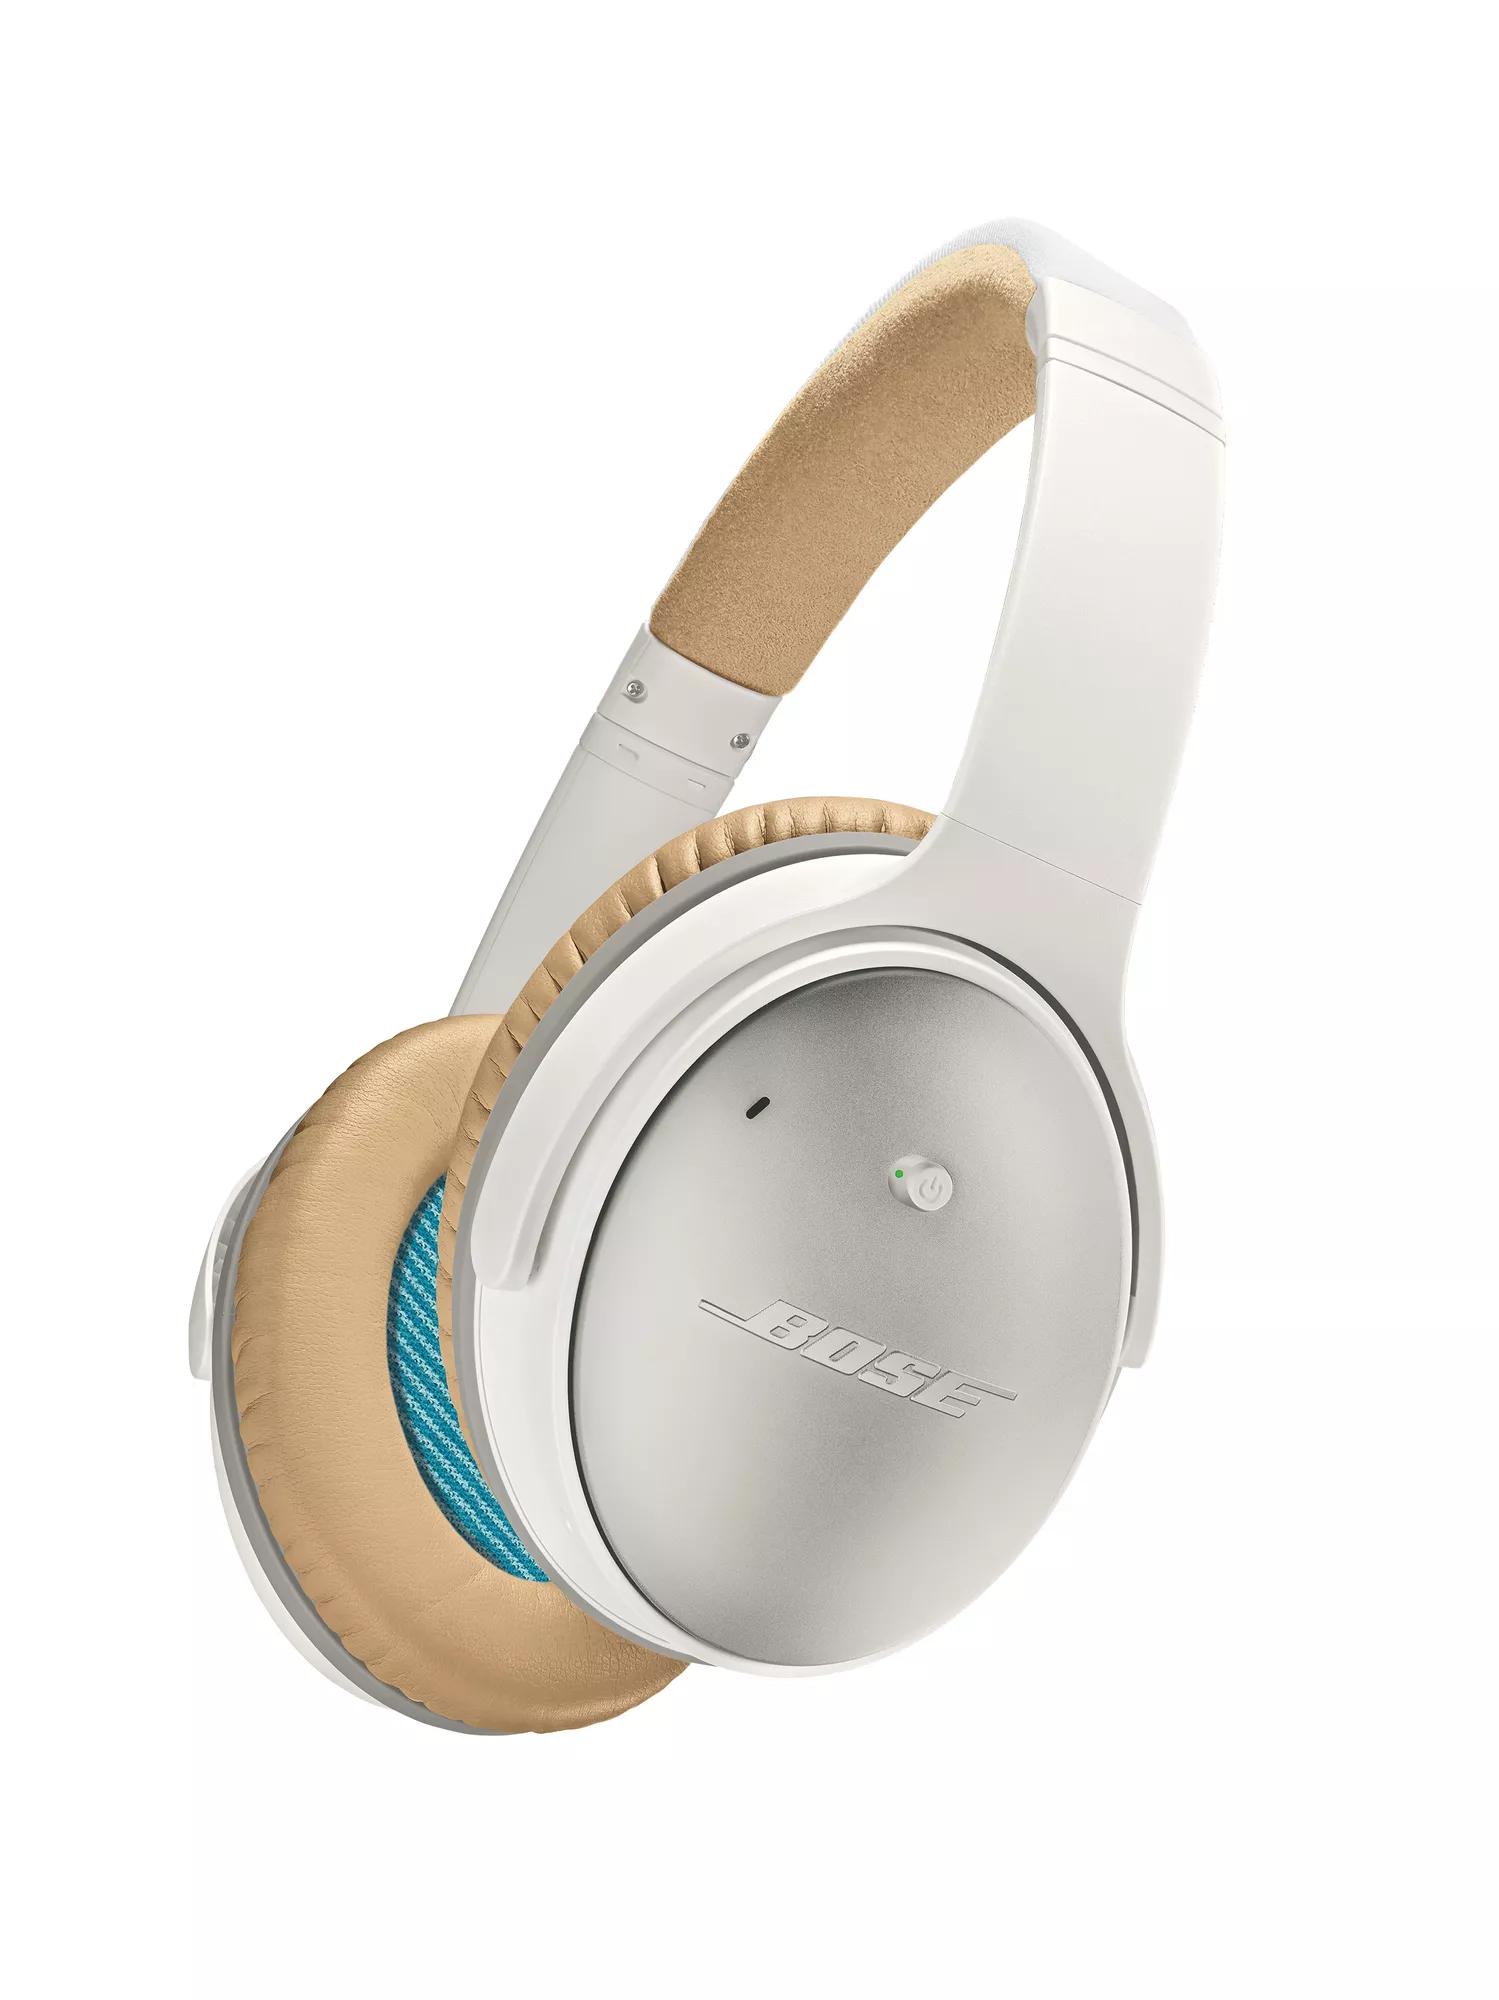 Bose QuietComfort 25 Vs 35 II: Which Set Of Noise-Cancelling